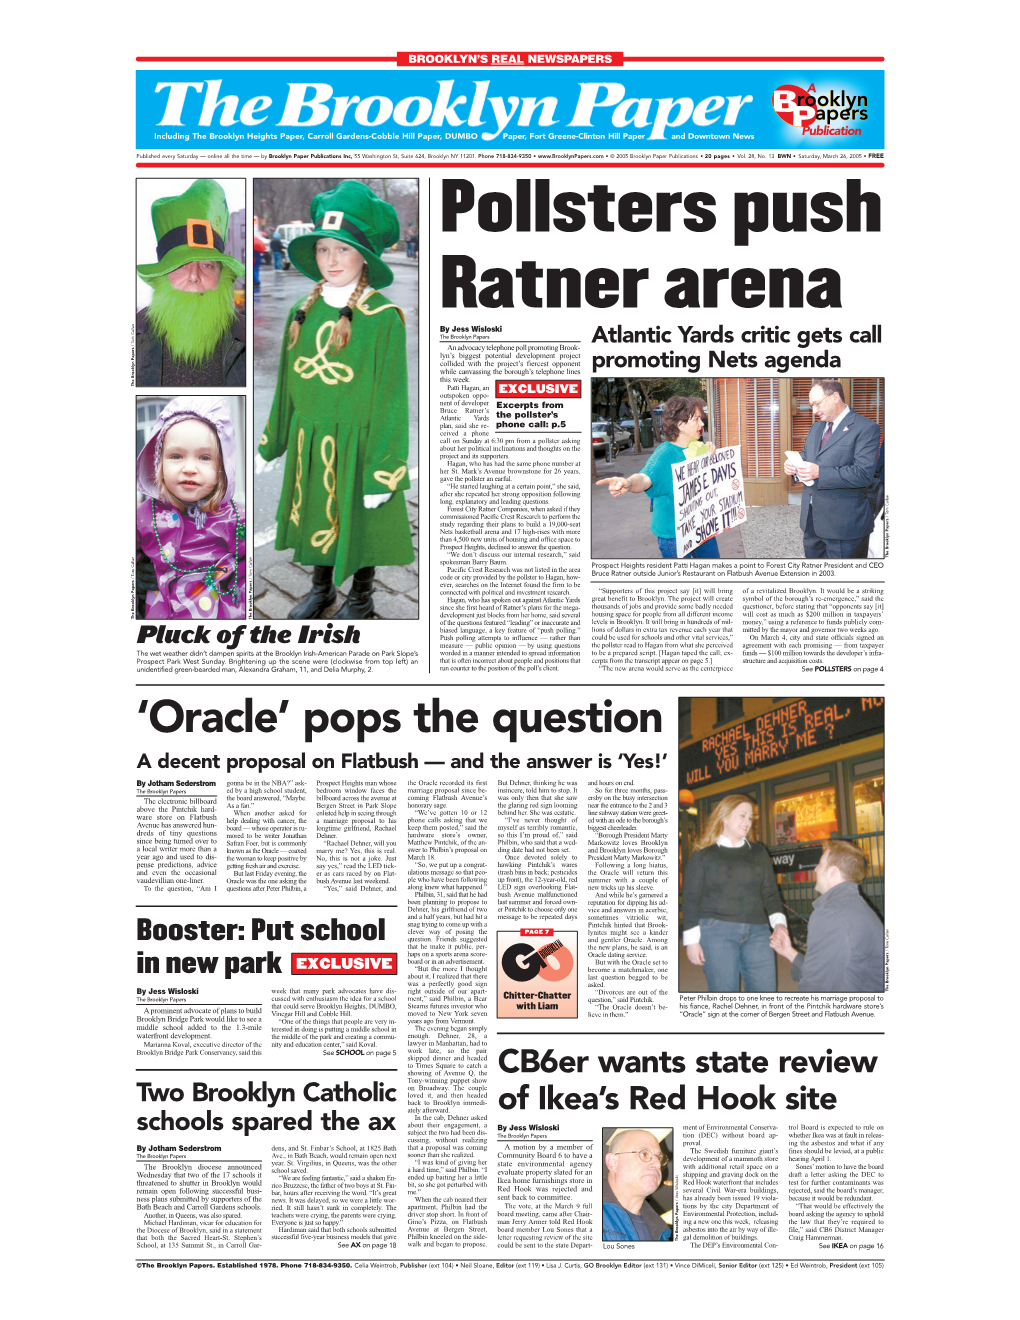 Pollsters Push Ratner Arena by Jess Wisloski the Brooklyn Papers